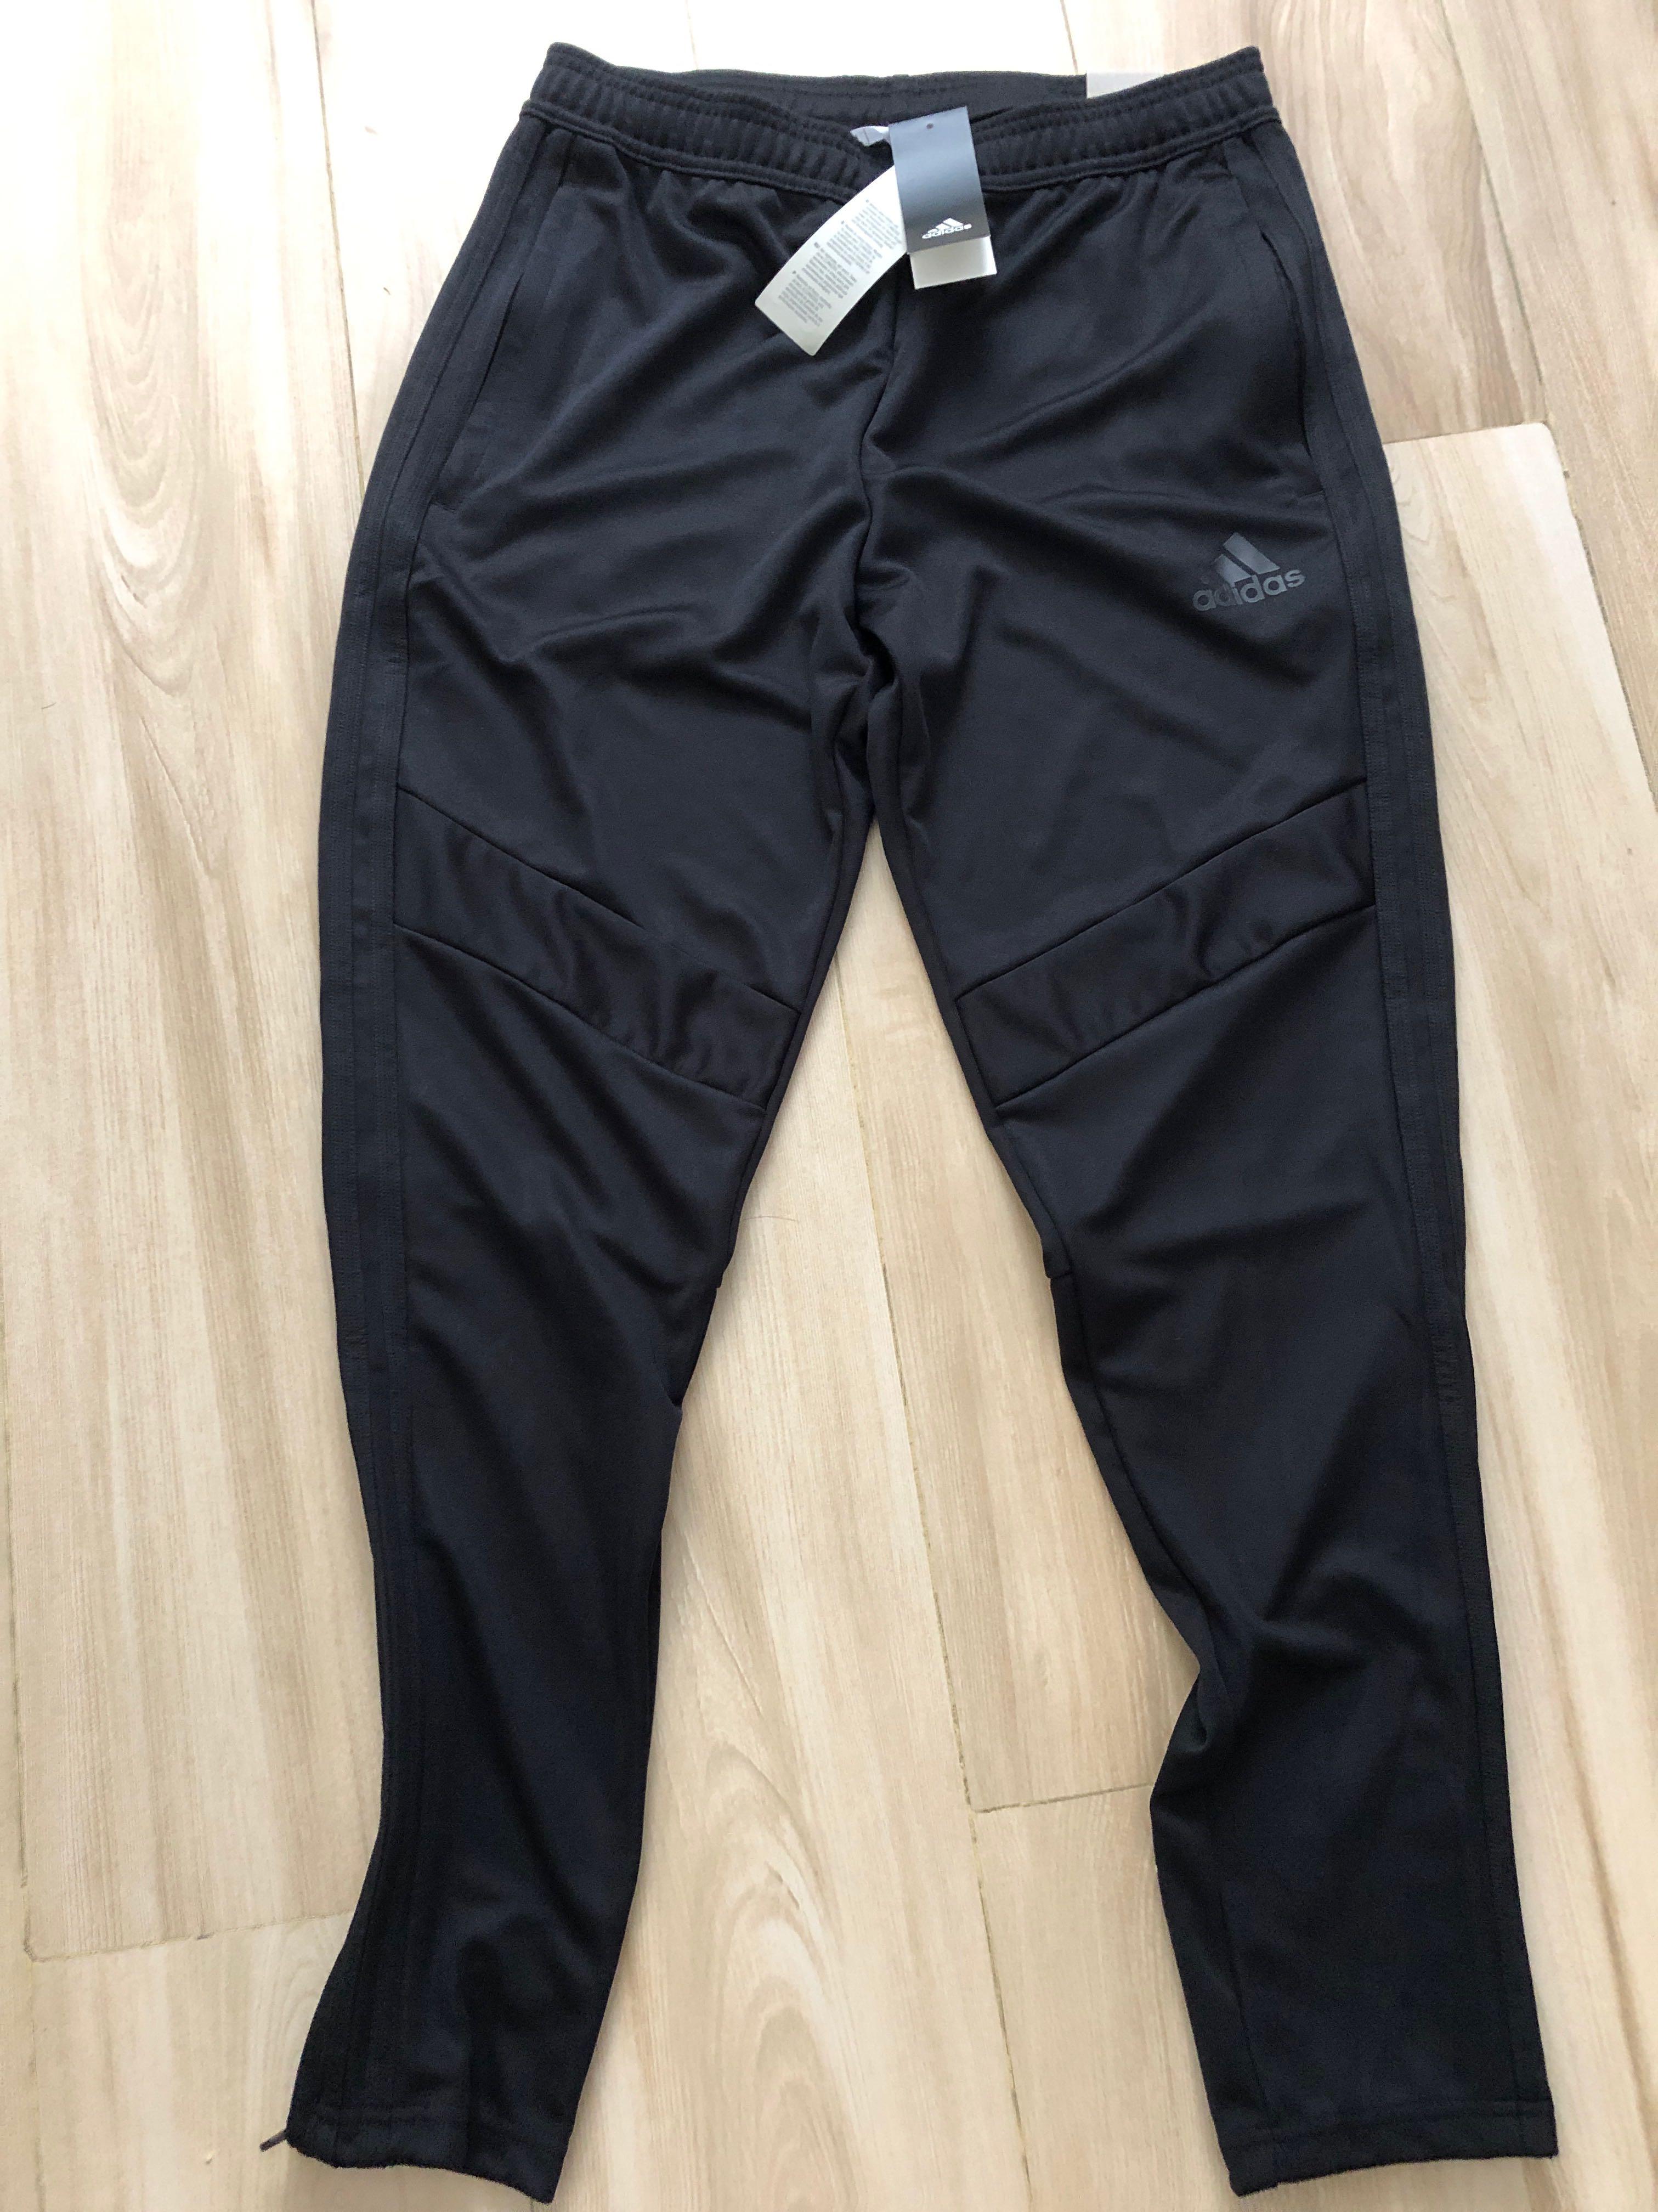 adidas tapered fit pants football